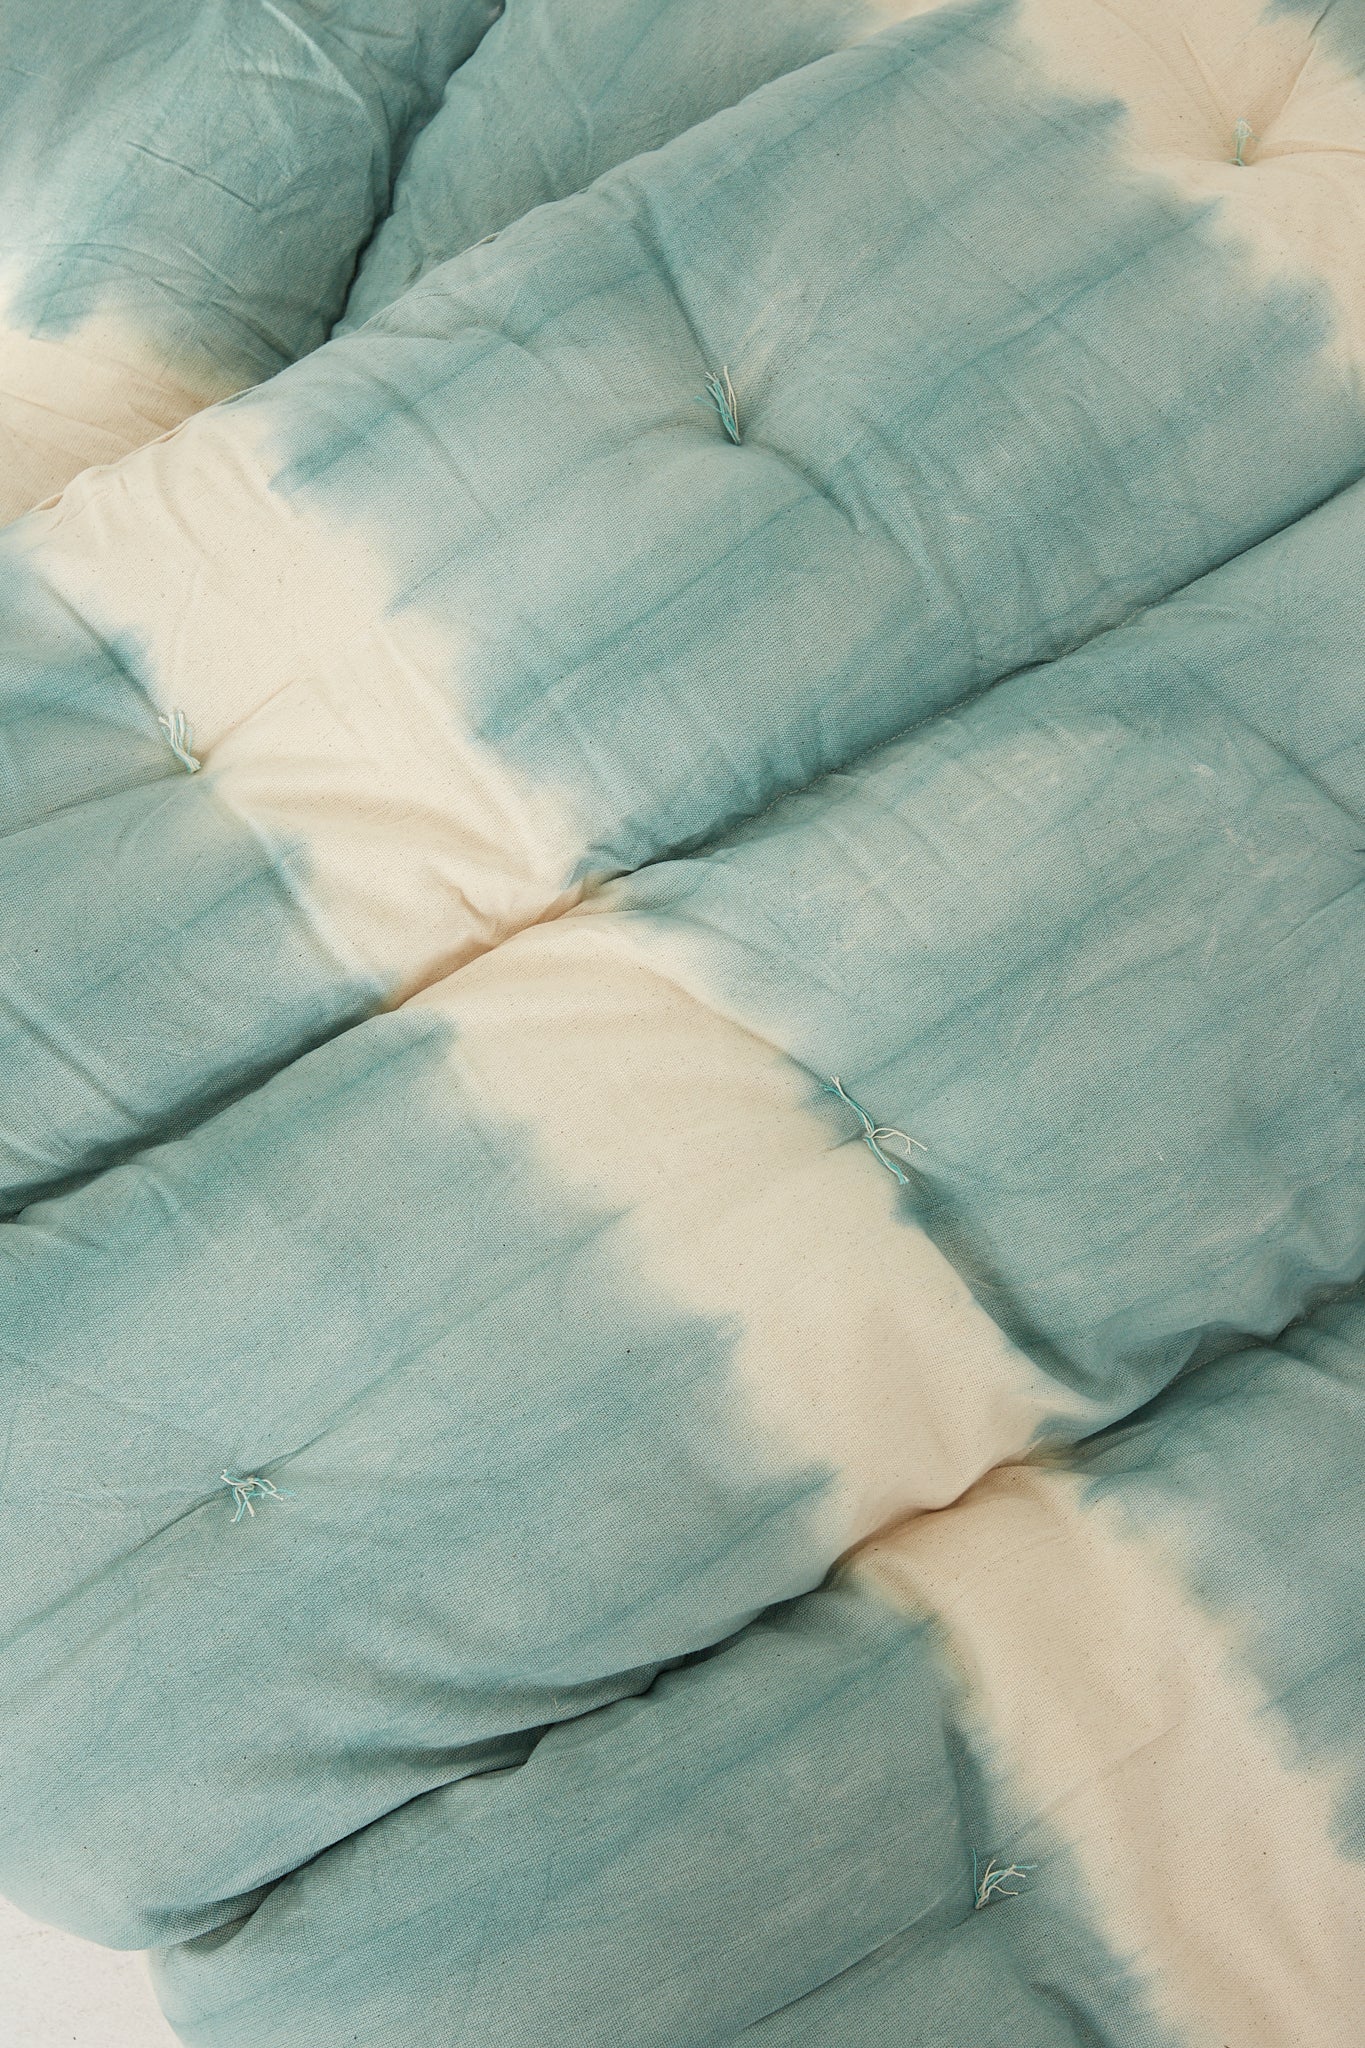 A sustainable cotton Tufted Overlay Mattress in Celadon Green Tie Dye, featuring tufted stitching for added texture, by Tensira.